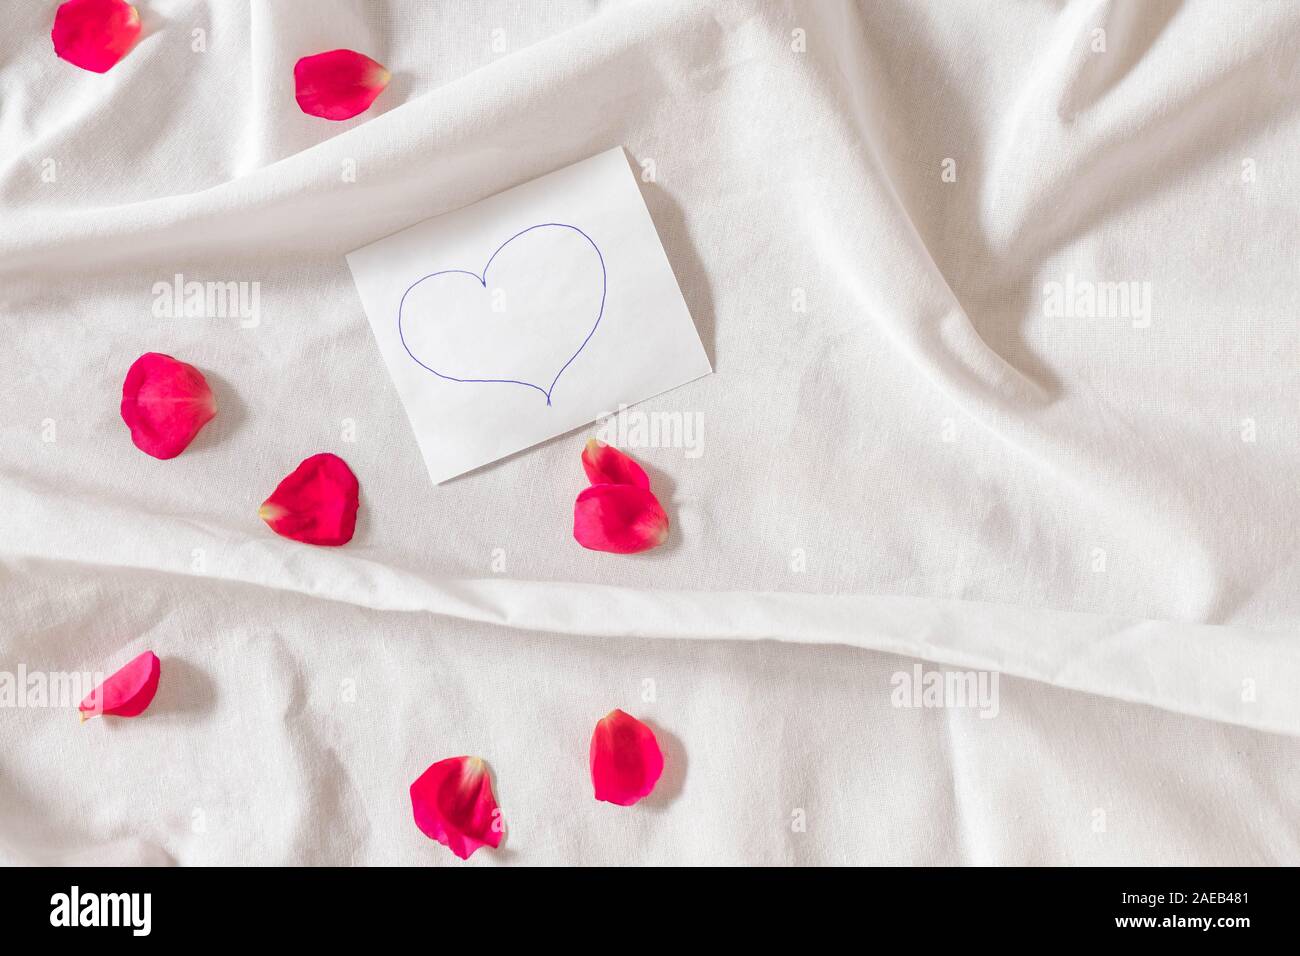 Love note with hand drawn heart on white bed sheets with pink rose petals Stock Photo